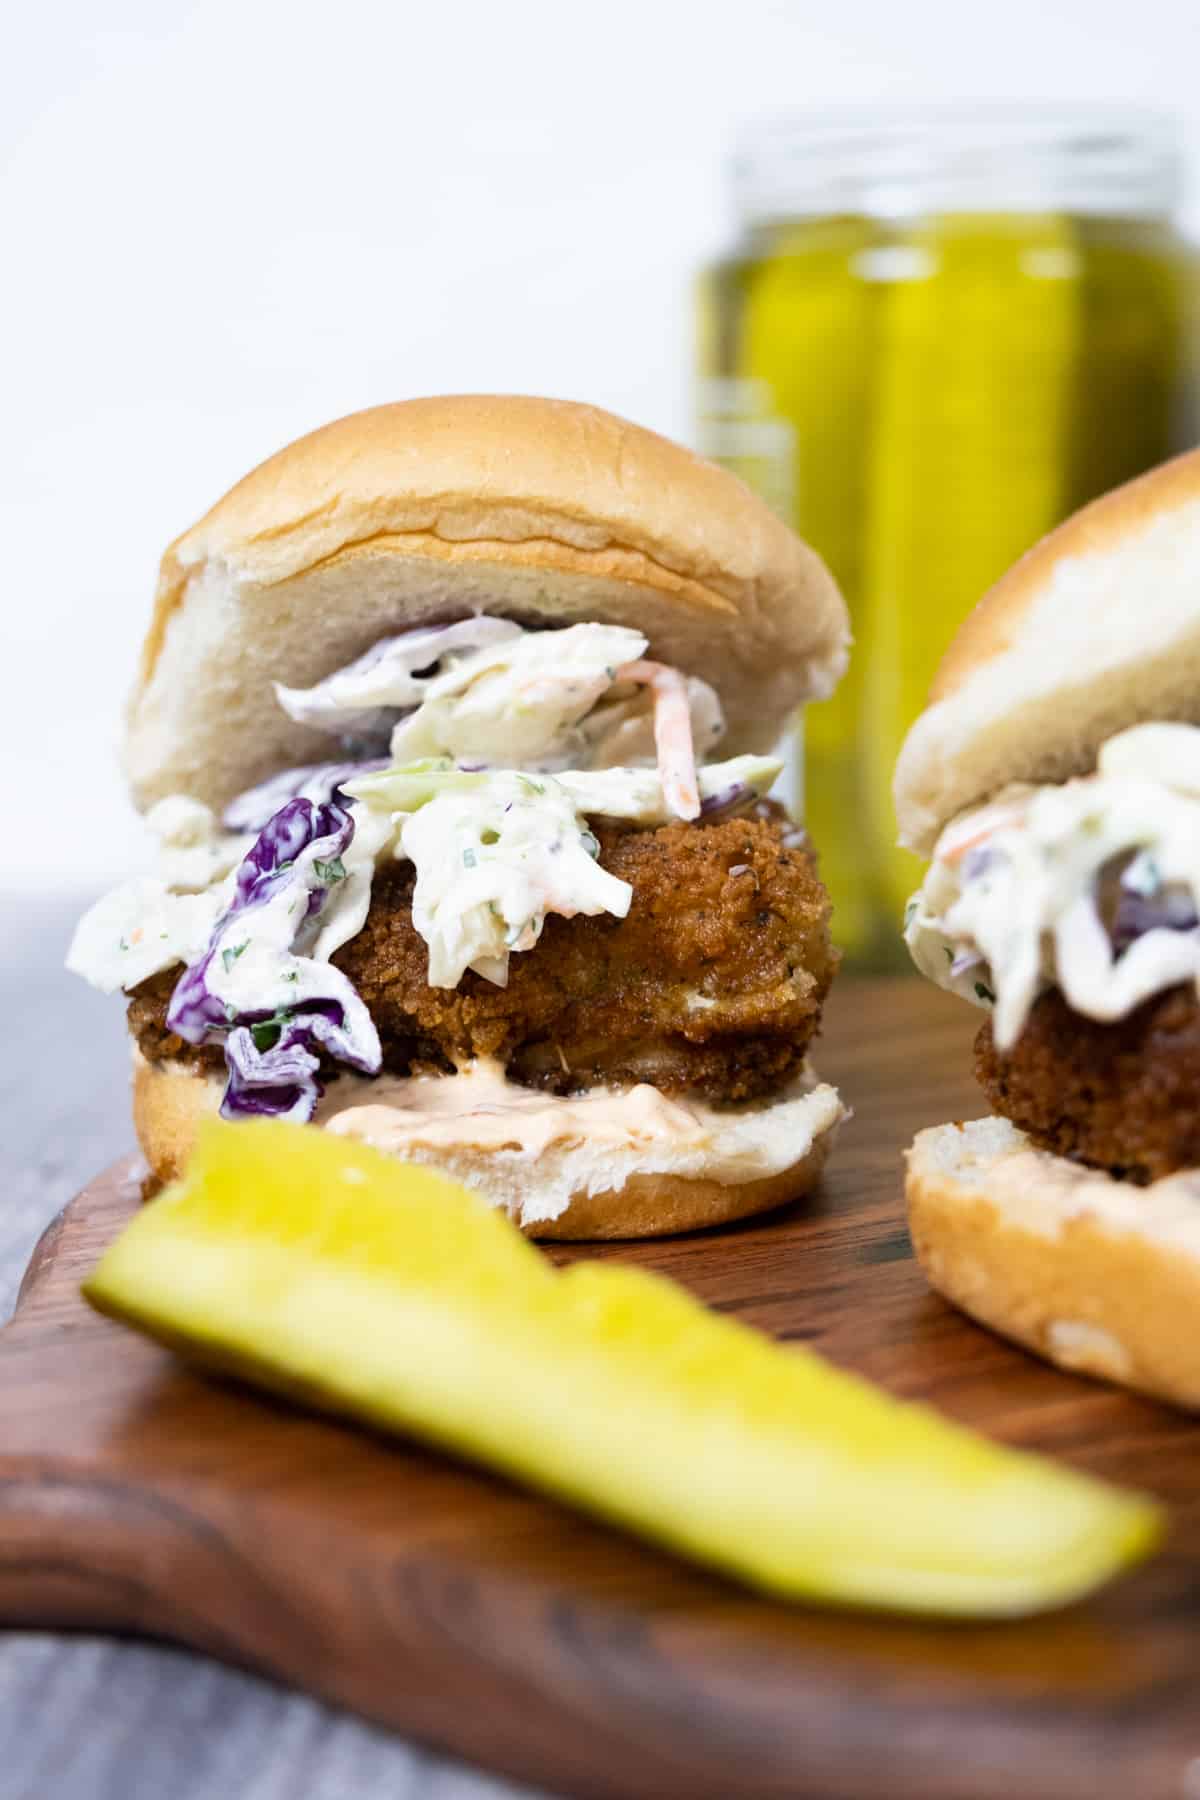 Crispy fish slider with coleslaw and chipotle mayo. Side of pickle